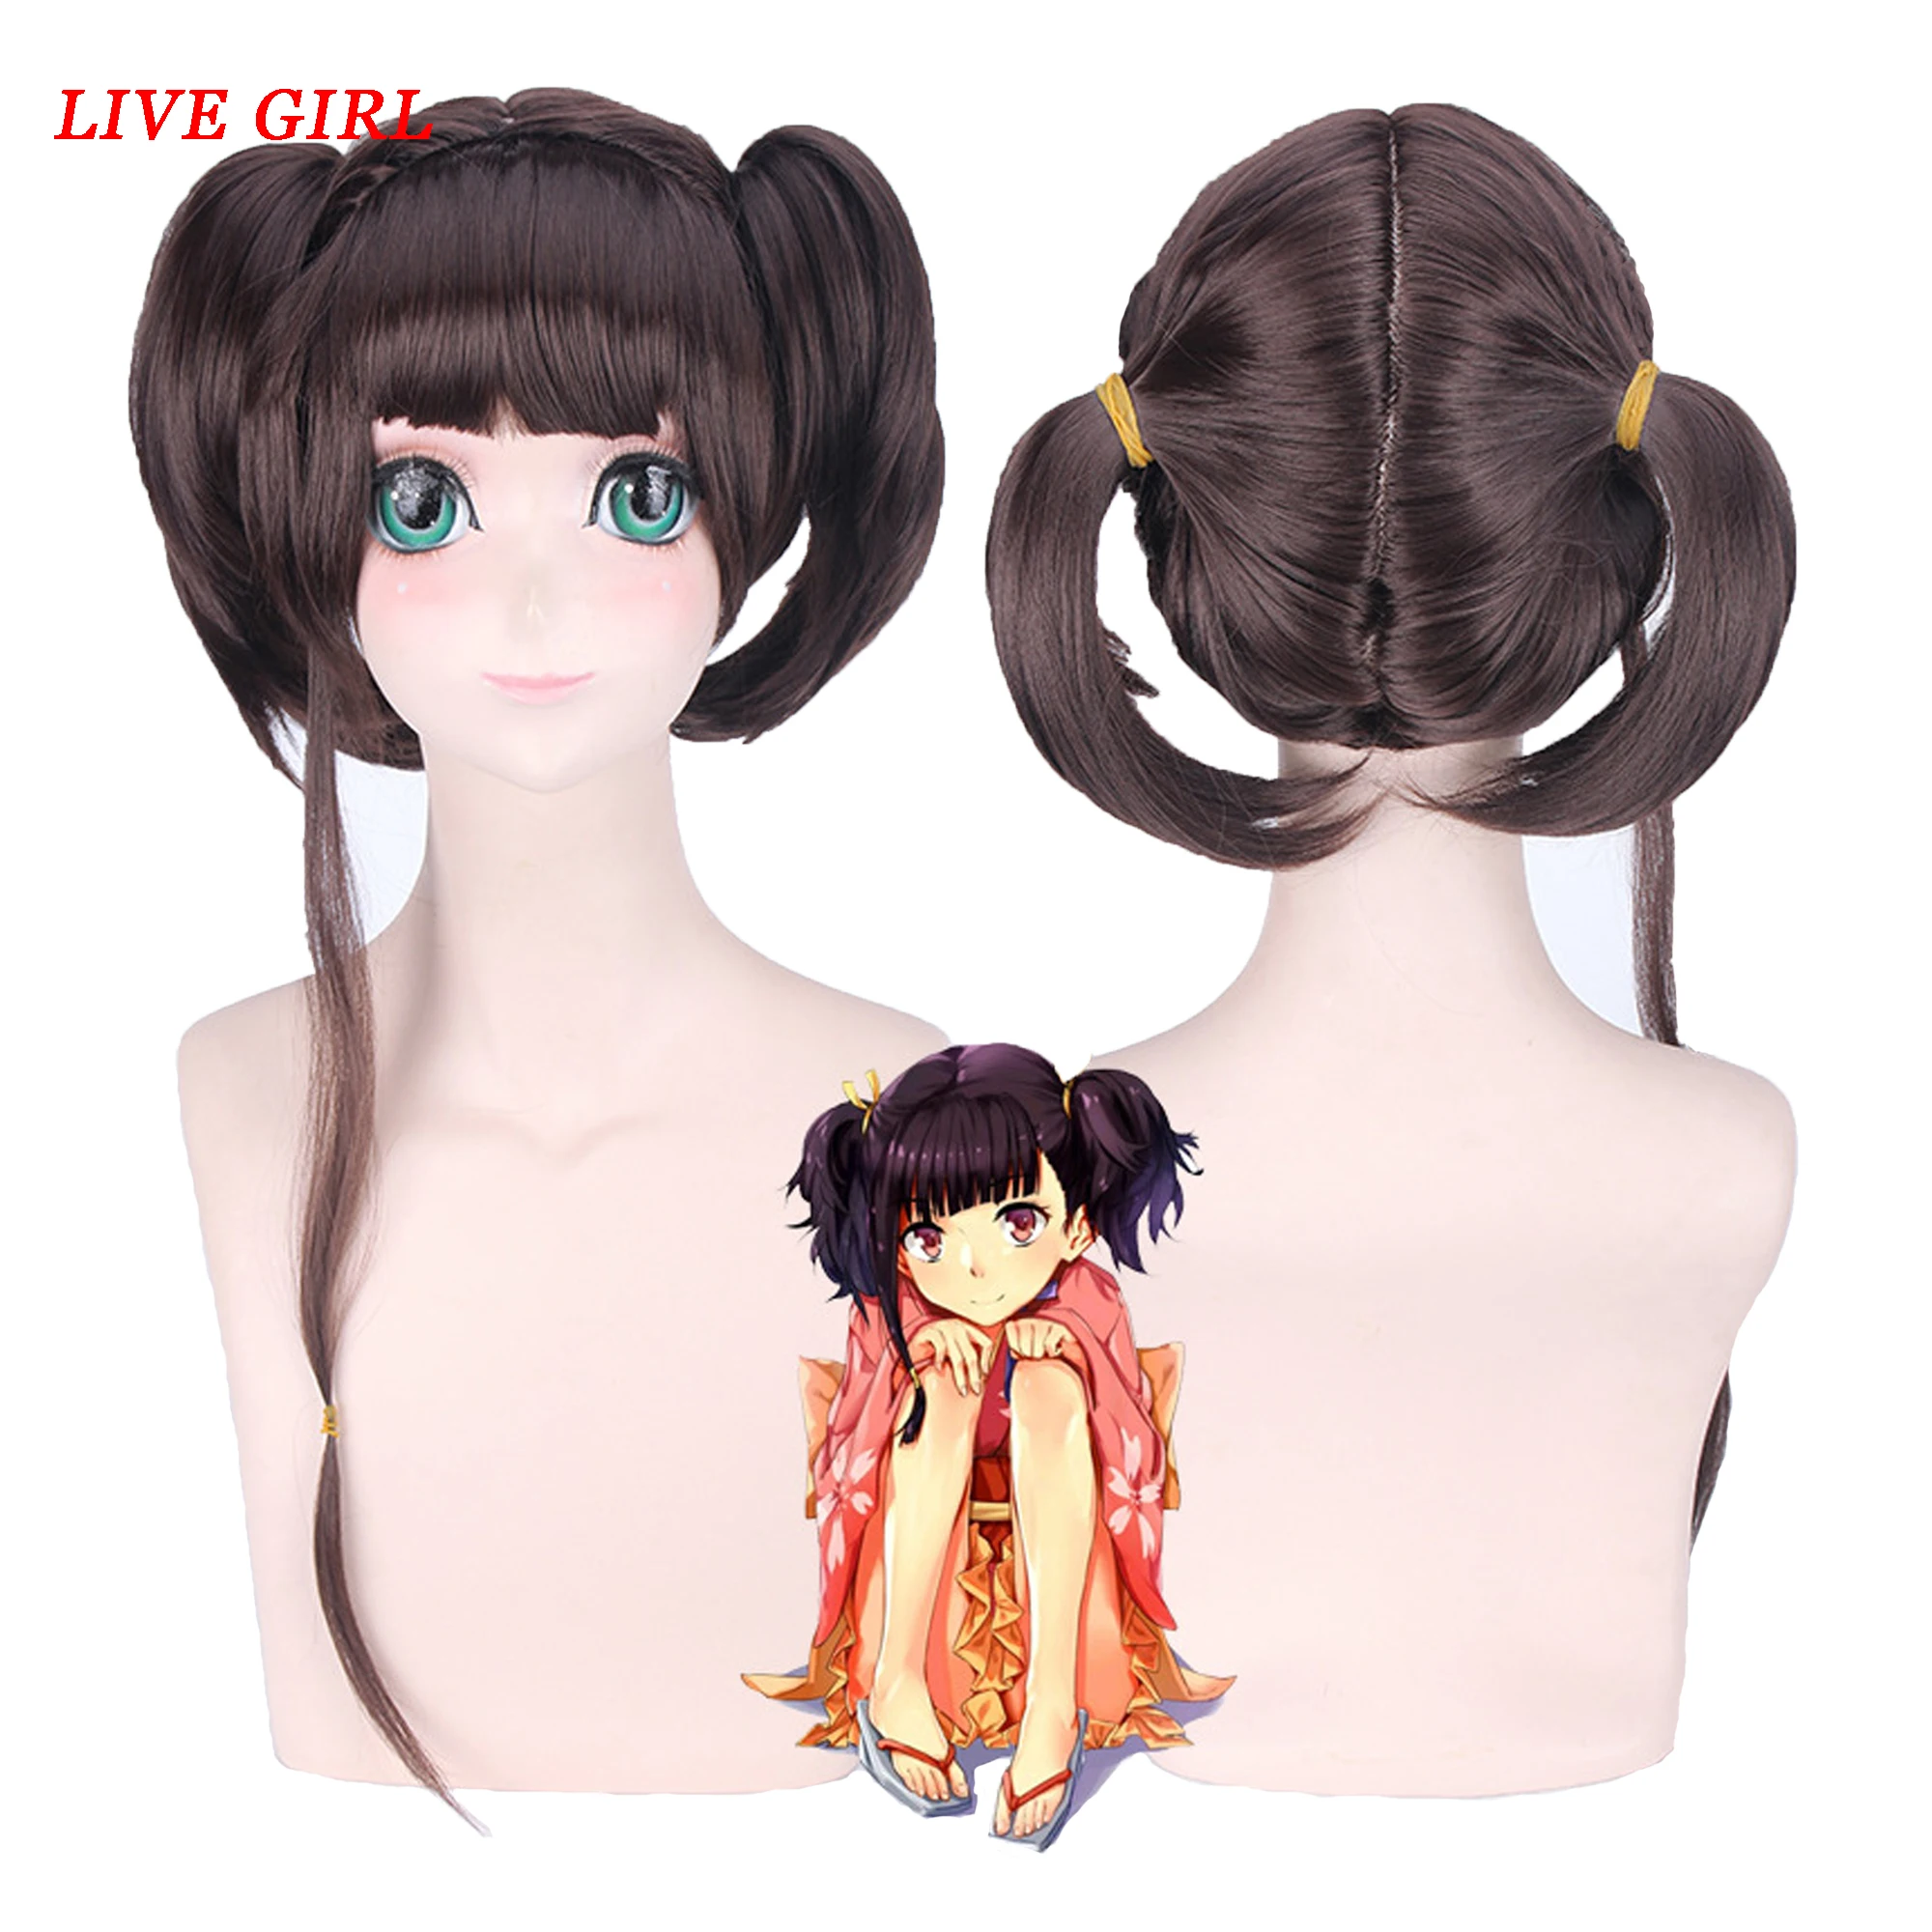 

LIVA GIRL Mumei Cosplay wig KABANERI OF THE IRON FORTRESS anime costume play wig free shipping Halloween costumes